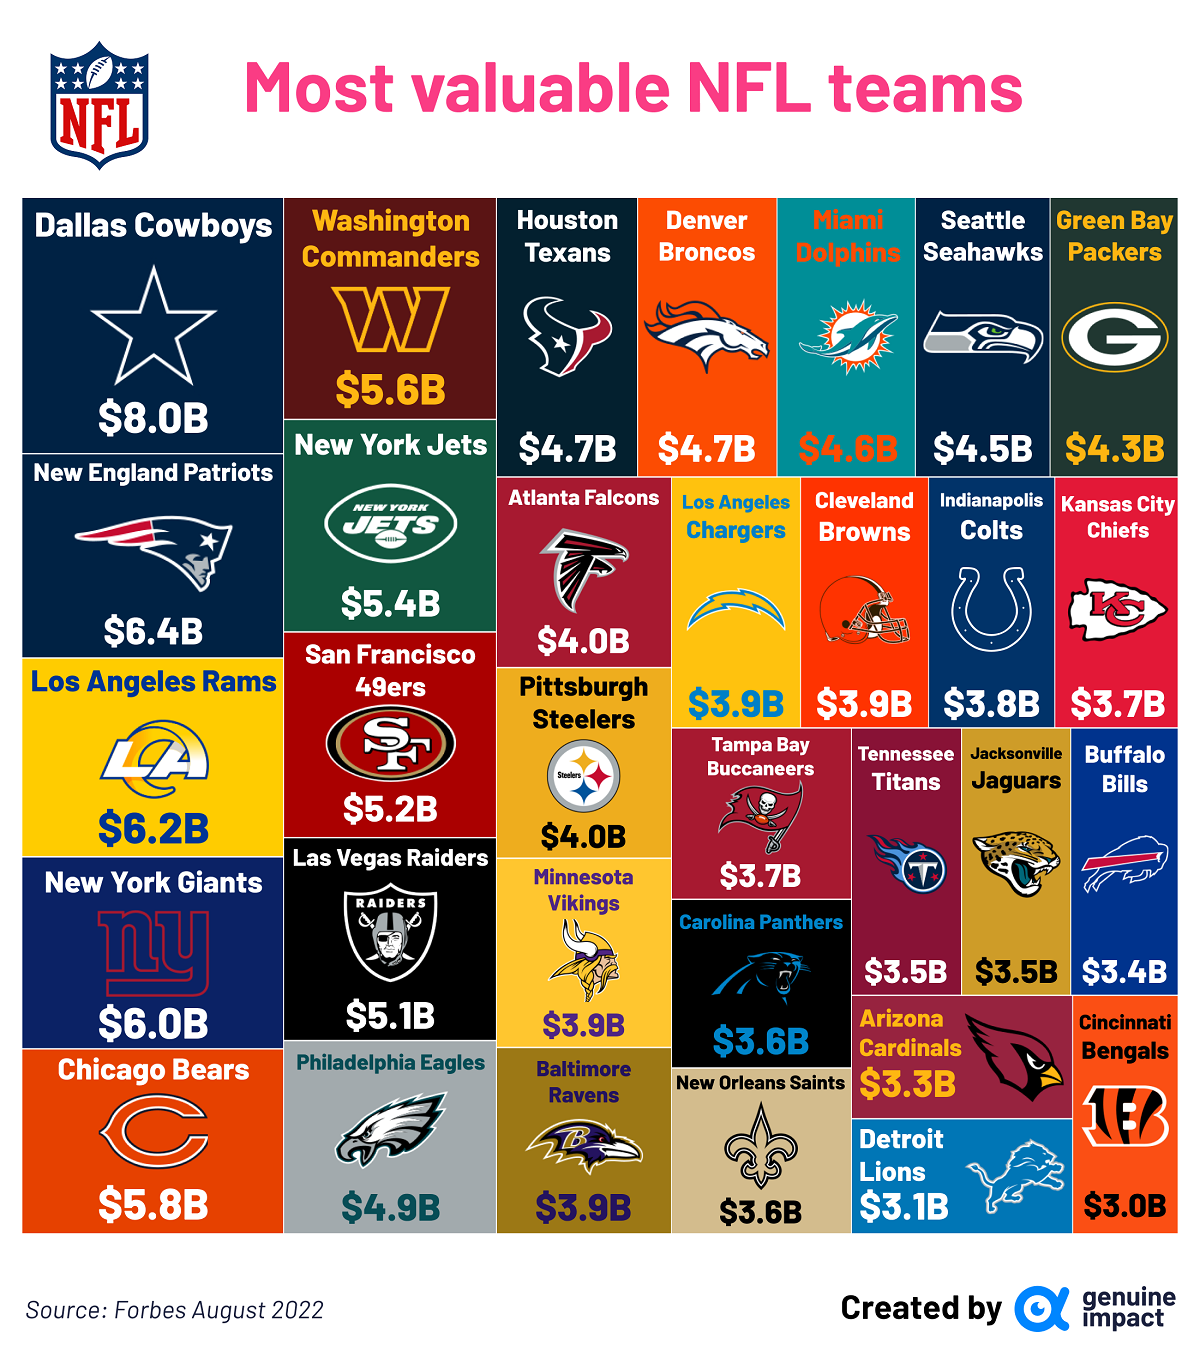 Who is the most unsuccessful NFL team?